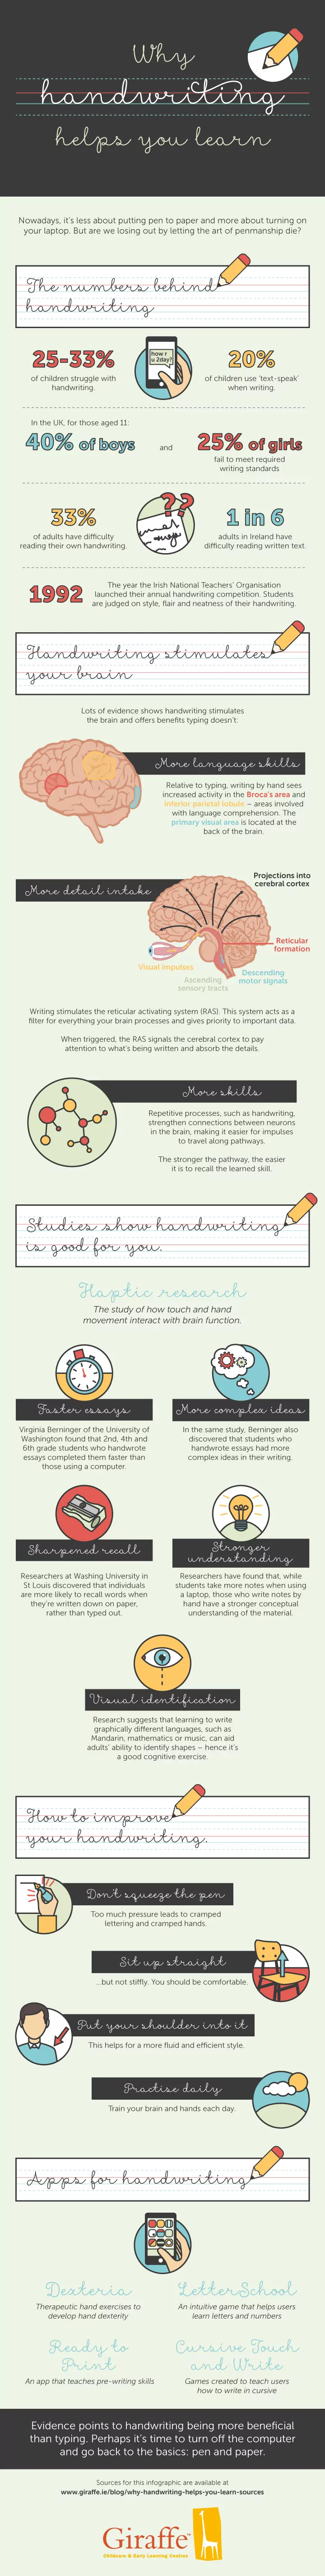 The Impact of Handwriting on Learning